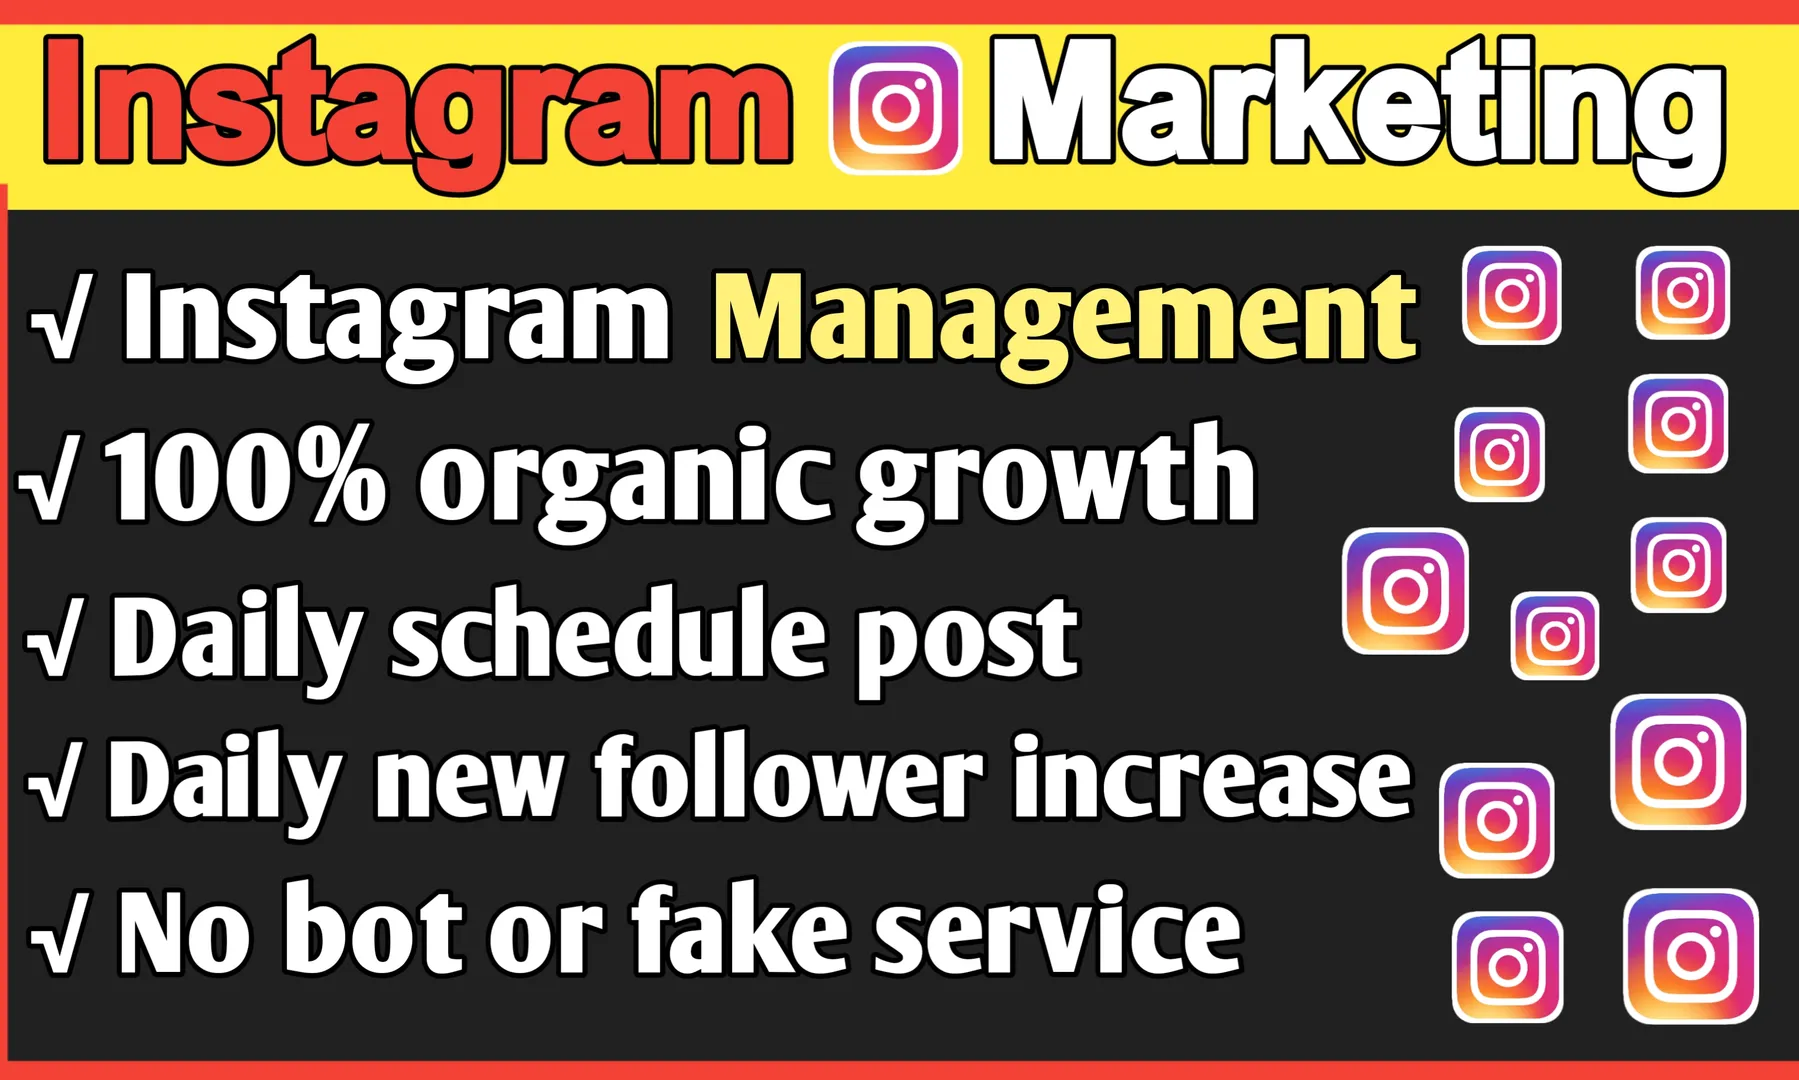 Hi dear,
Are you looking for someone who will do Instagram management for Organic growth & promotion? 
Then You have stay in the right place.
As an instagram manager, I will best try to bring organic real active followers to your account. And it will be 100% organic pro-motion.

What you will get from me: 
100% Organic increase fo.llower
Best hashtag Research
Include Targeted Audience
Per day post according to instruction
Scheduling post
Properly brand awareness
Unfollow those who don't engage back
Competitor analytics

My specialty: 
100% real Work 
I will never give fake service
Engage real audience 
Best service provide
Friendly communication

Requrement of work: 
1.Your Instagram account Access
2.All post

Order Here:
Fiverr account: https://shorturl.at/clNW9